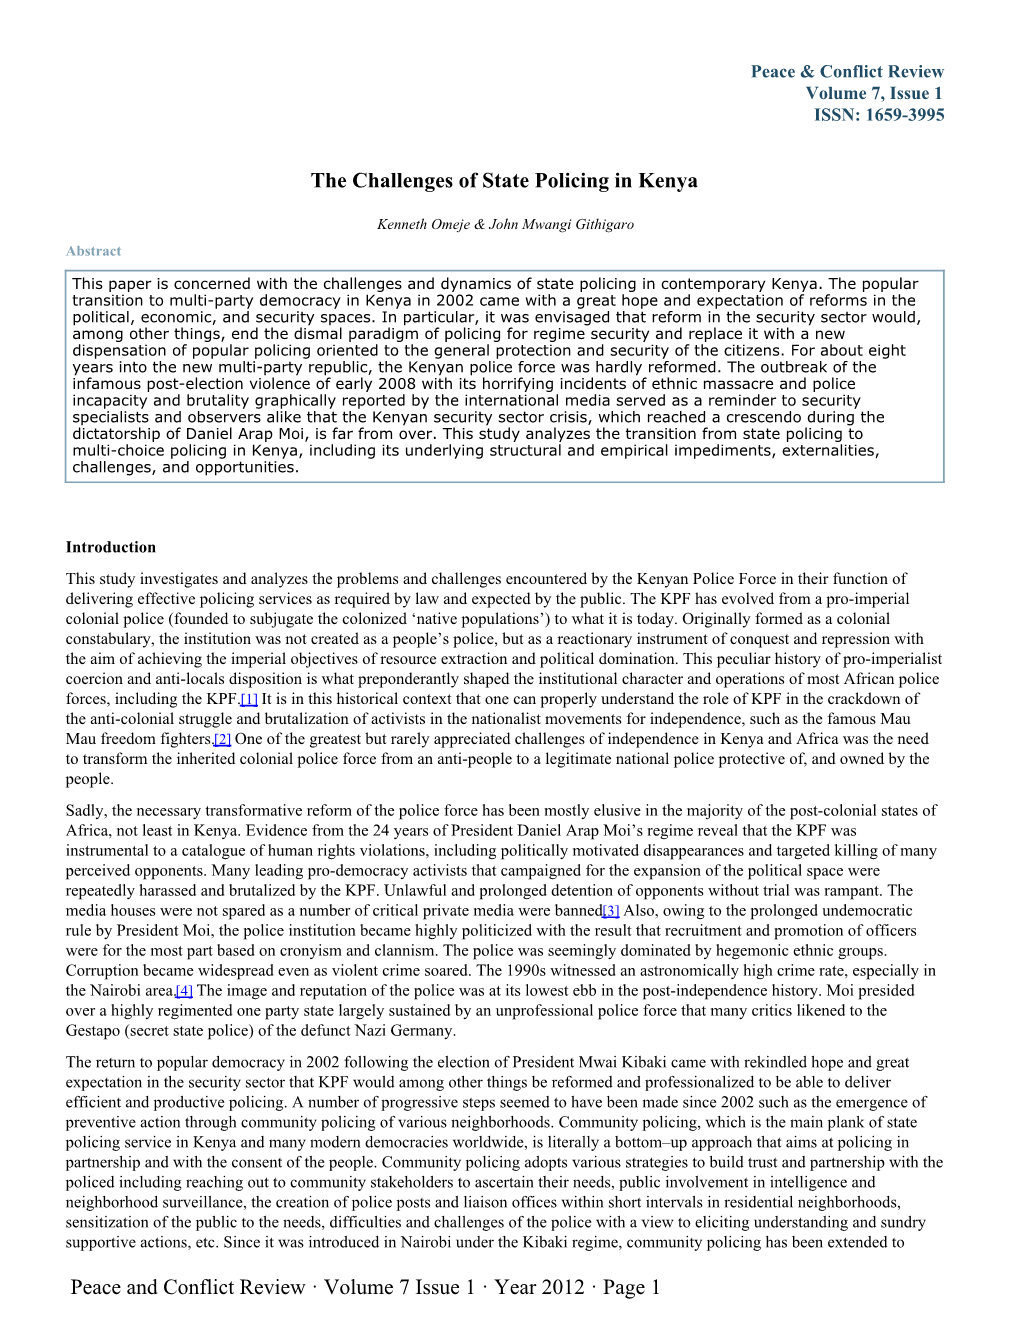 The Challenges of State Policing in Kenya Peace and Conflict Review